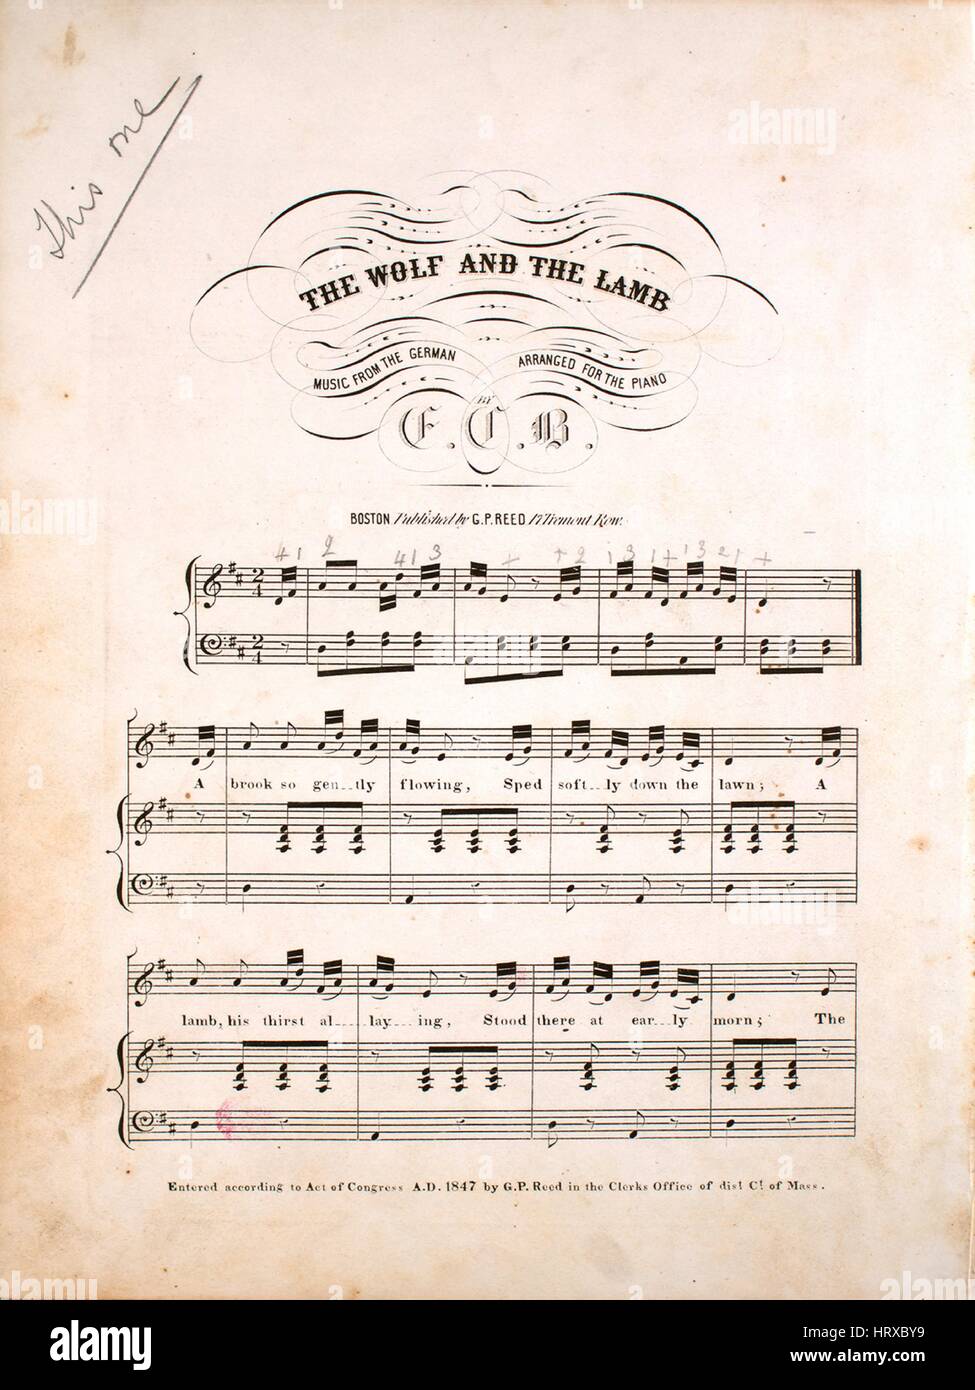 Sheet music cover image of the song 'The Wolf and the Lamb', with original  authorship notes reading 'Music from the German Arranged for the Piano by  EC B', United States, 1847. The